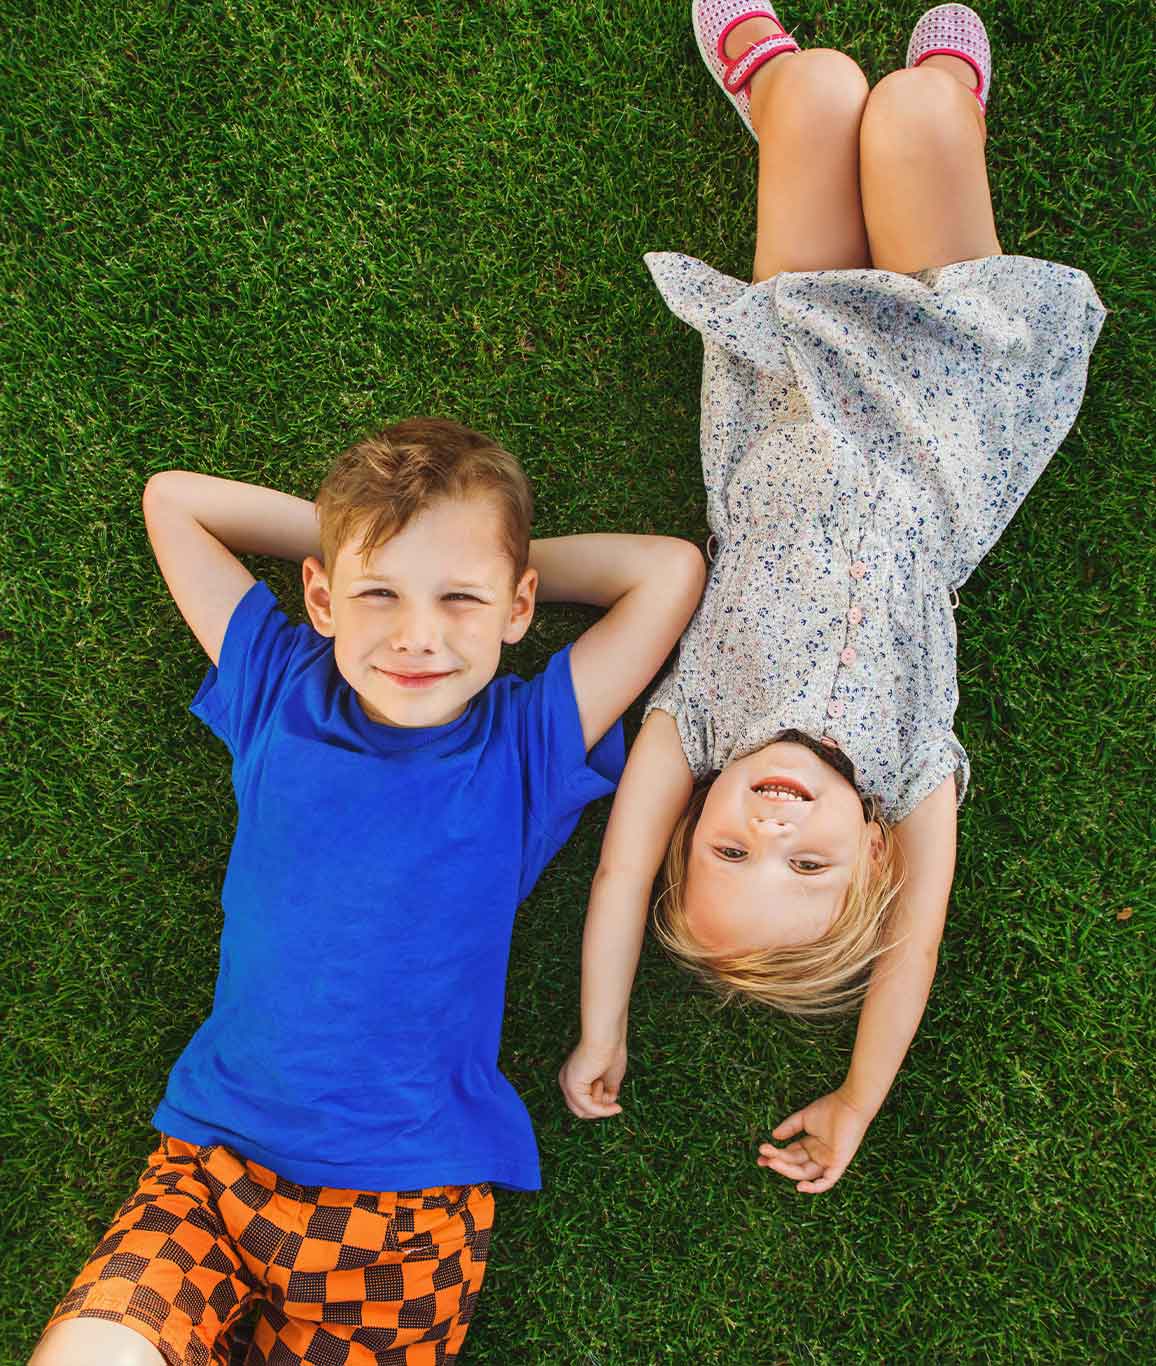 Two young kids lying on a lawn looking up and camera center